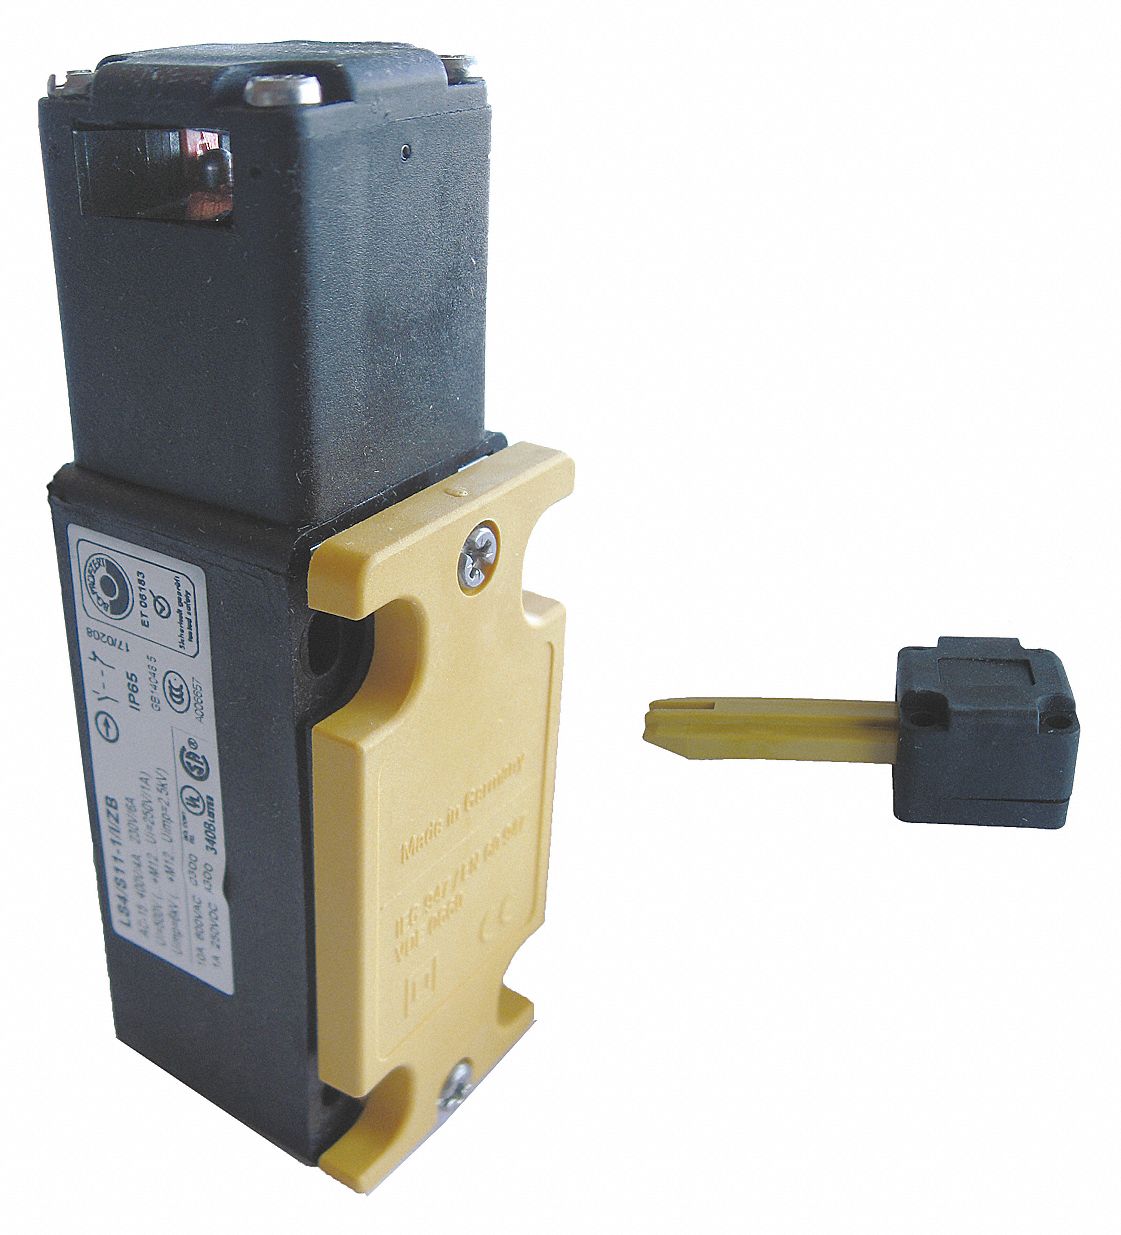 NEW EATON LS4-S11-1-I-ZB SAFETY SWITCH LS4S111IZB